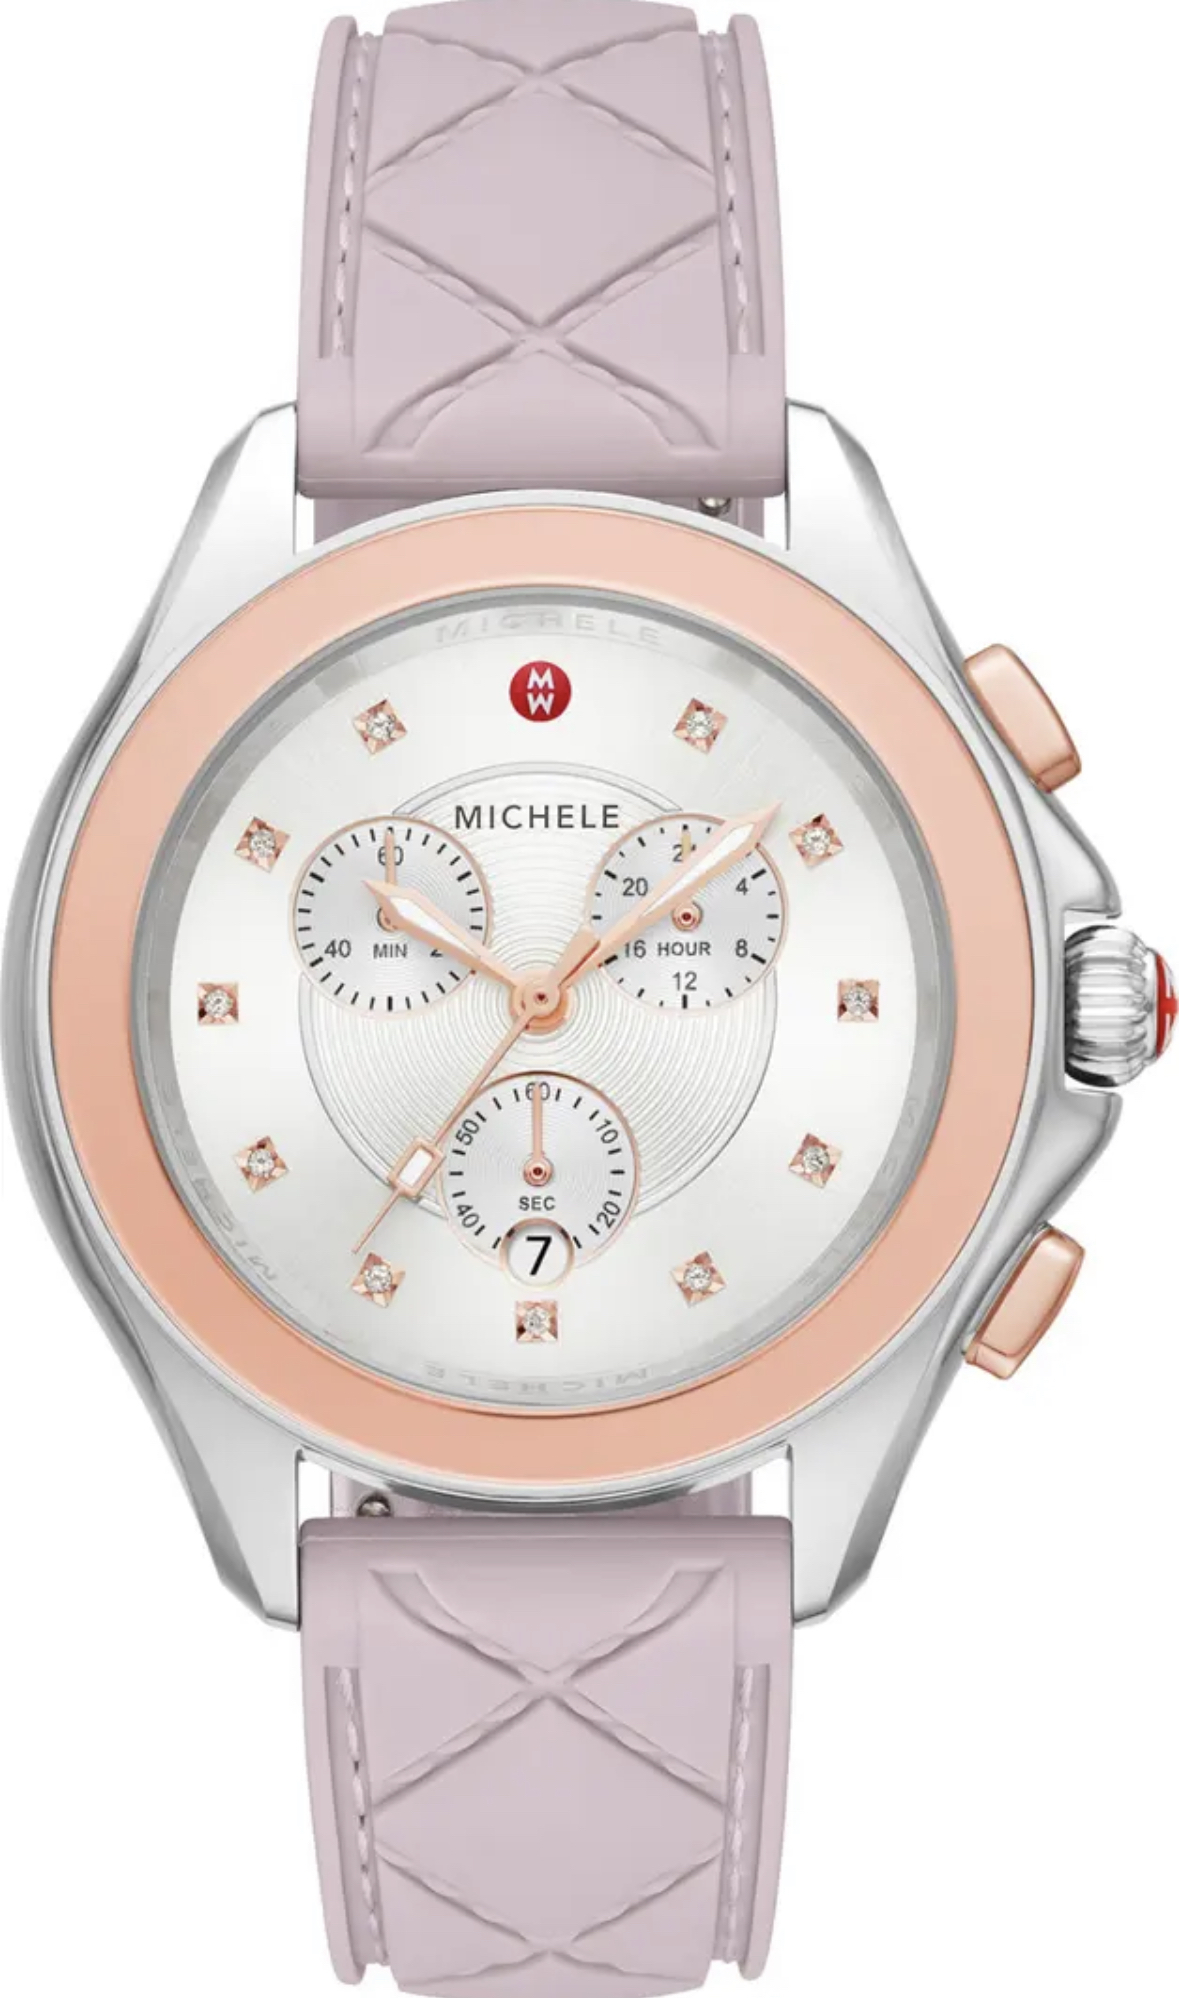 Michele pink silicone band watch